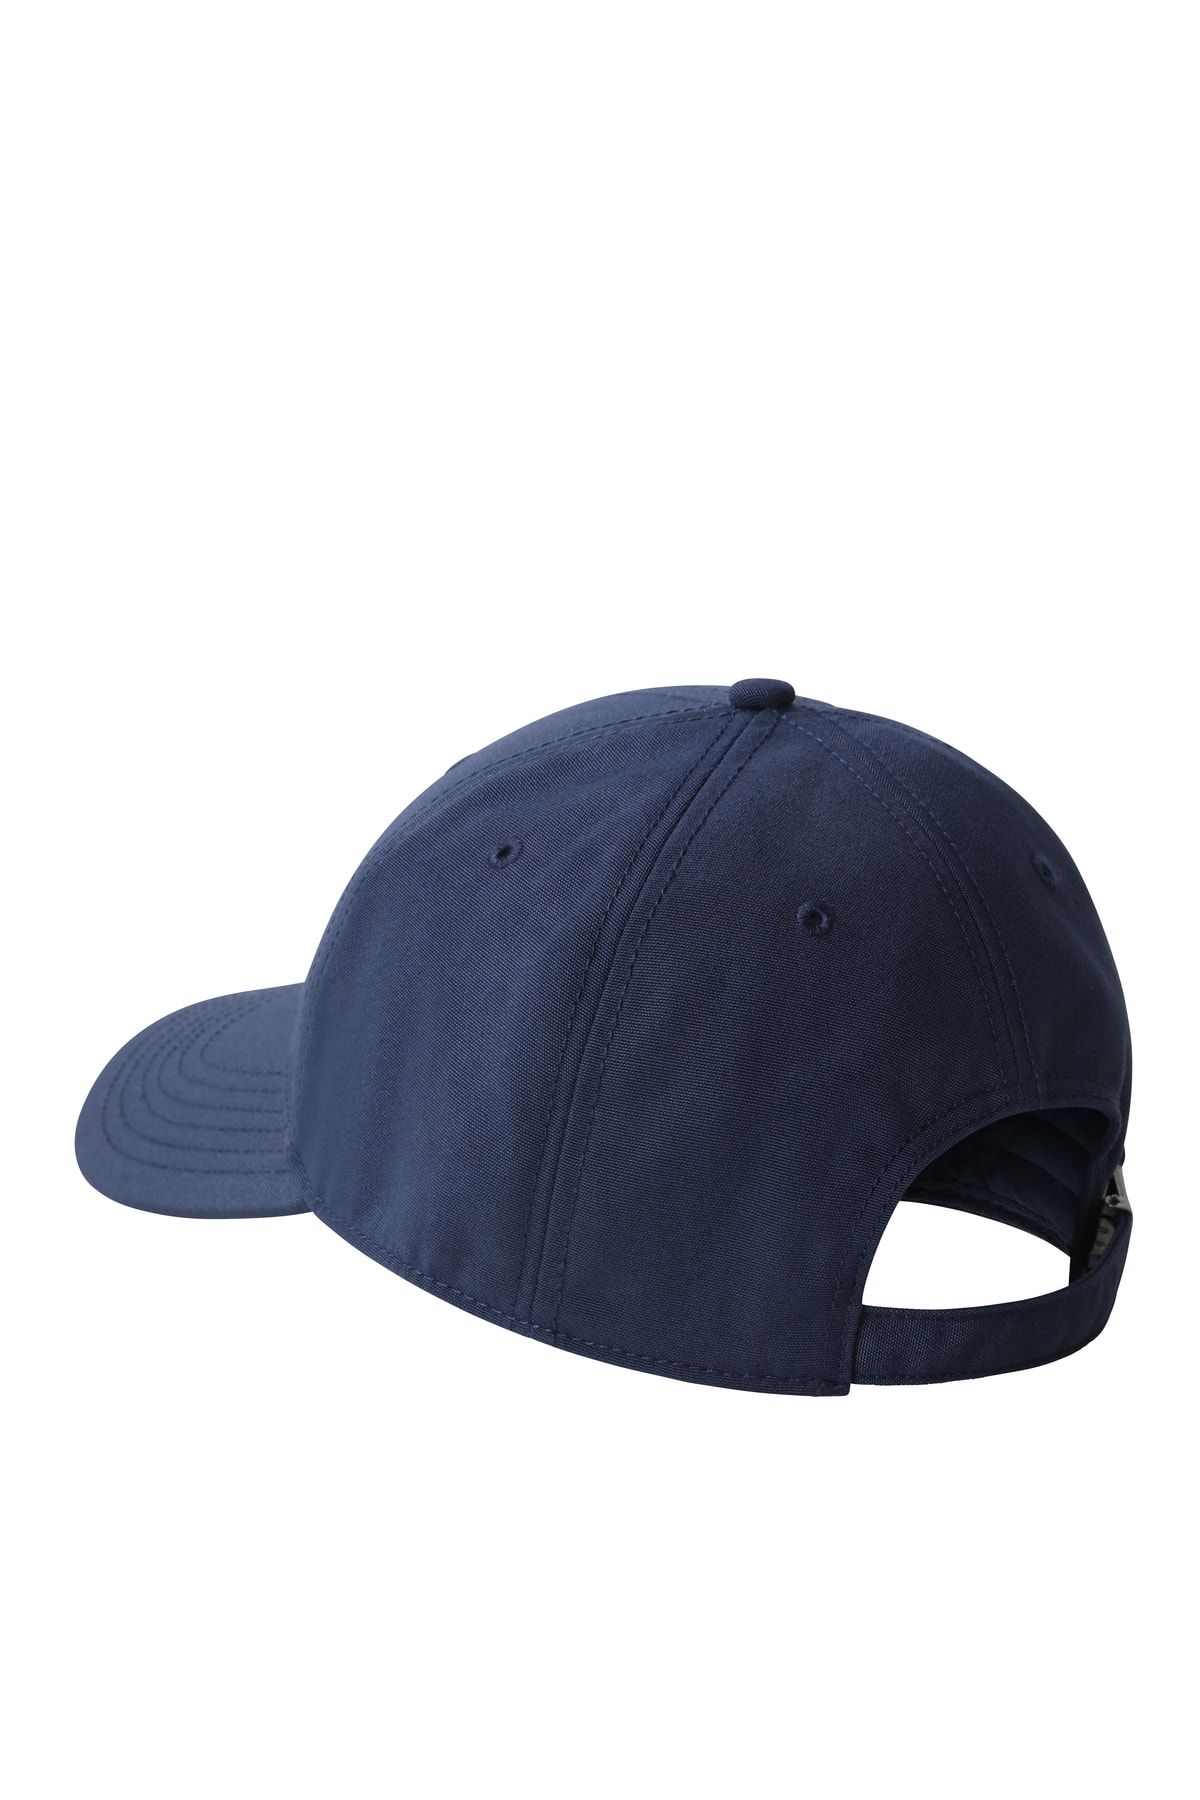 The North Face بازیافت 66 خط کلاسیک Unisex Navy Blue Hat NF0A4VSV8K21